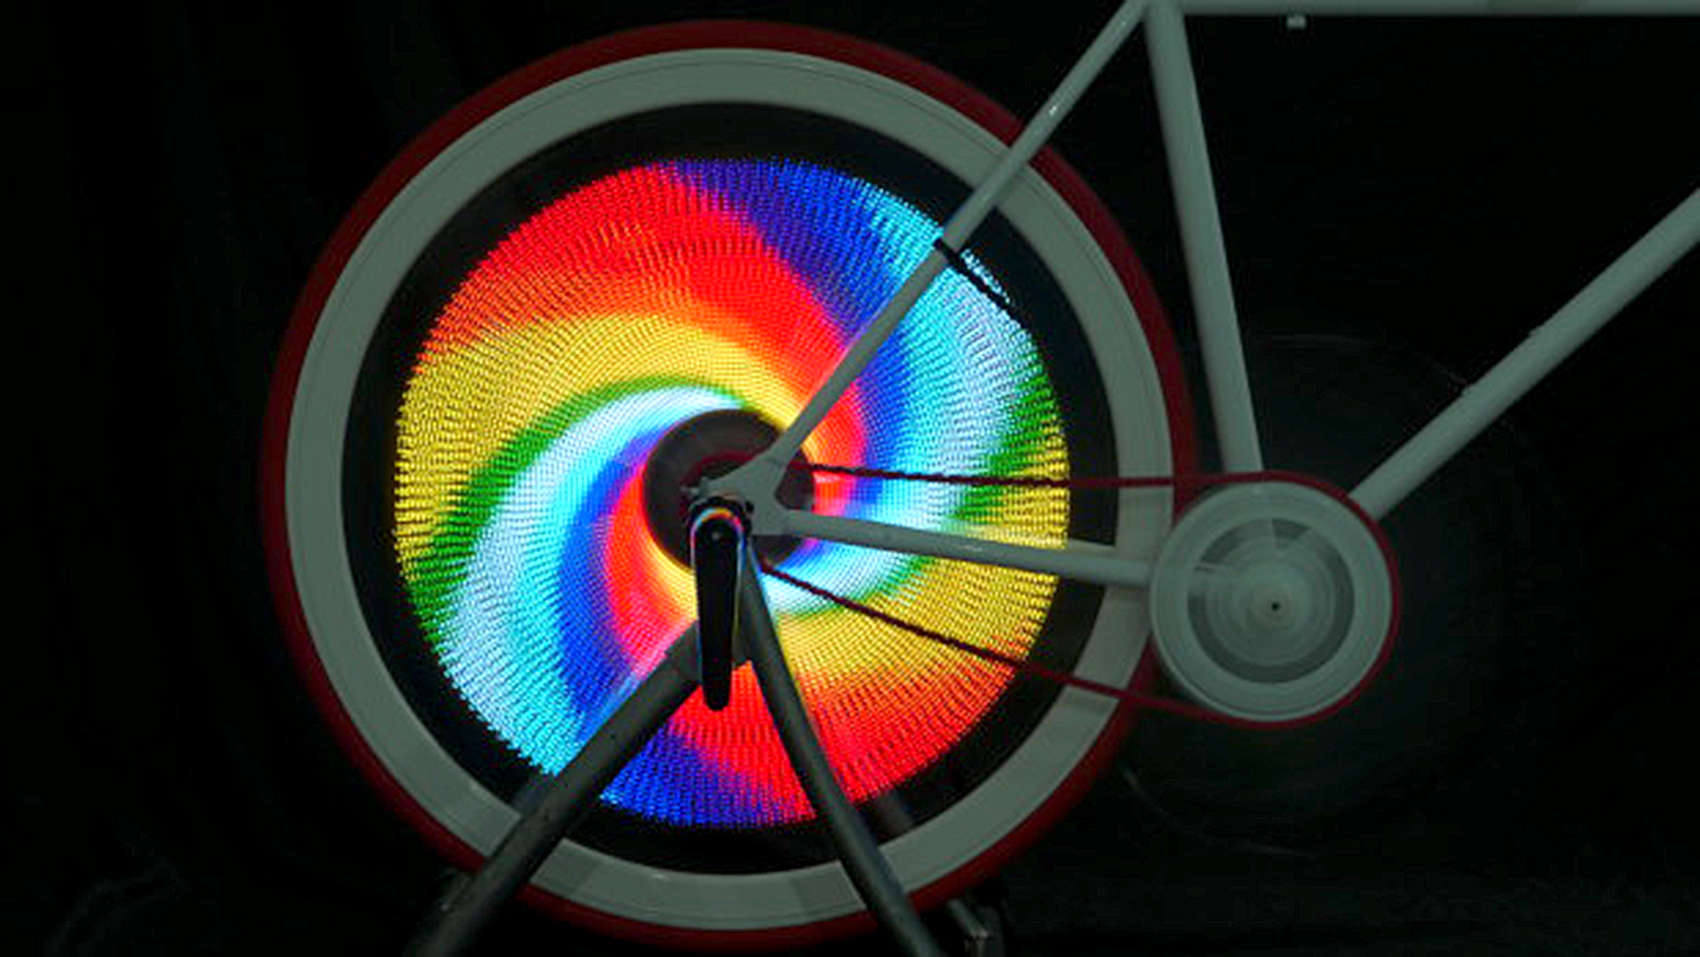 The Balight brings animation to the bike wheel with 376 LED lights.